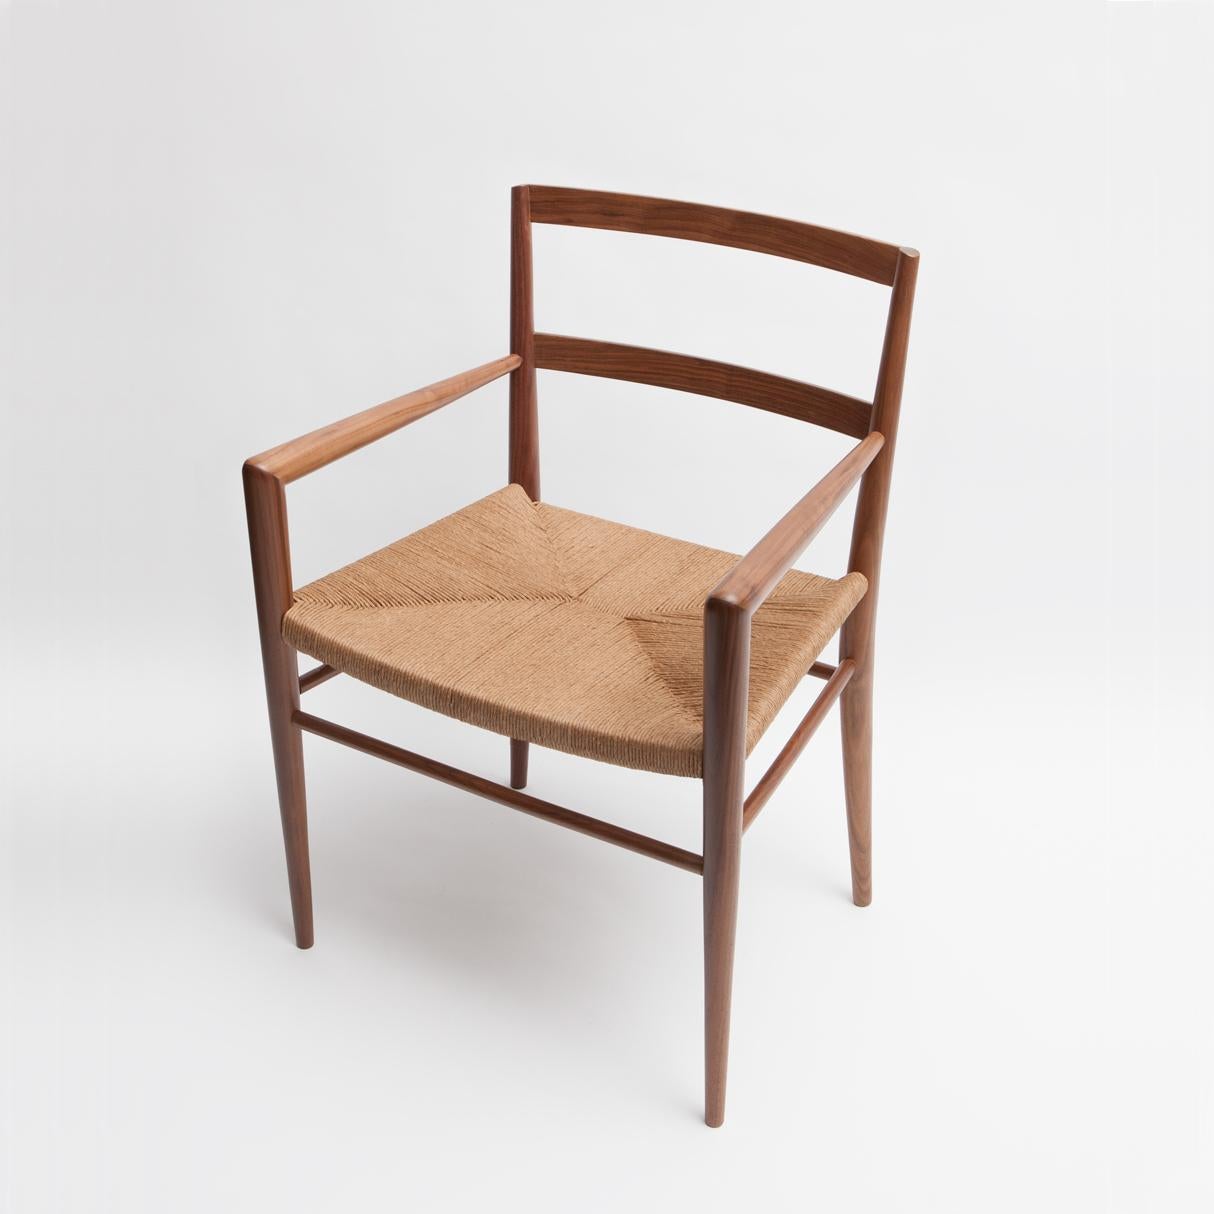 Originally designed by Mel Smilow in 1956 and officially reintroduced by his daughter Judy Smilow in 2013, the woven rush dining armchairis classically midcentury. This collection’s handwoven seating and handcrafted wooden frame provide a